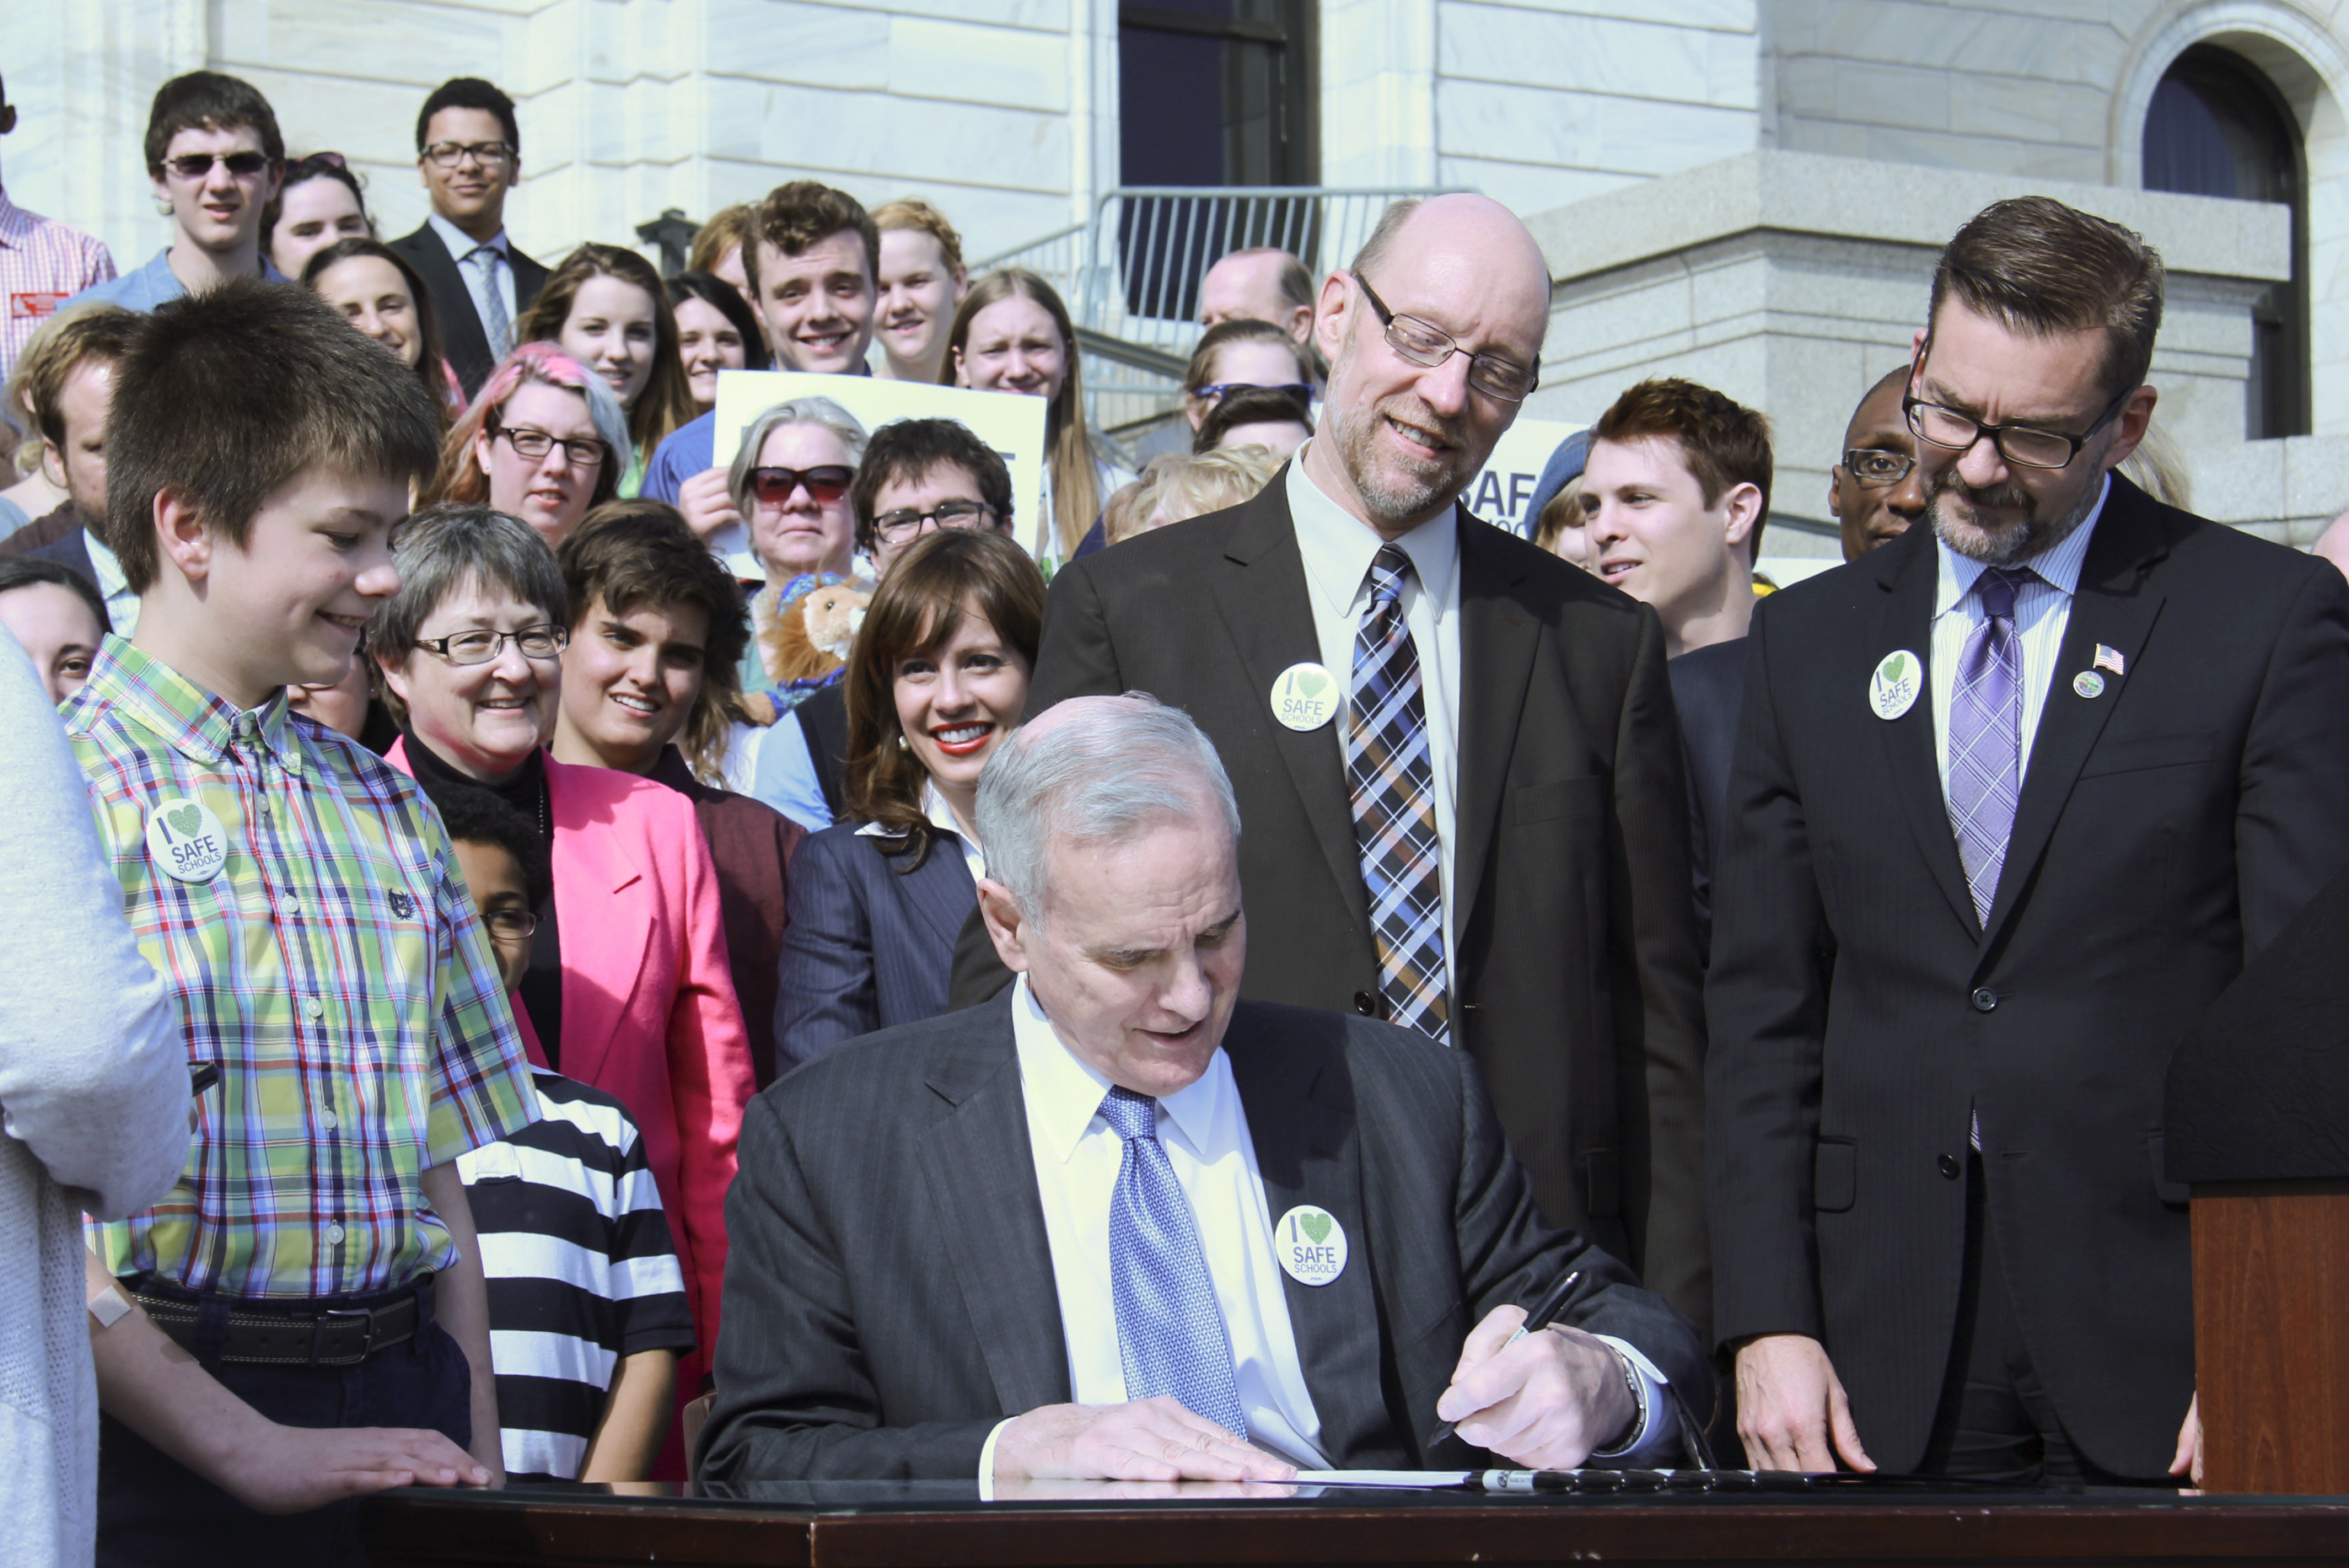 Surrounded by students, parents, teachers, and school administrators, Governor Mark Dayton today signed the Safe and Supportive Schools Act